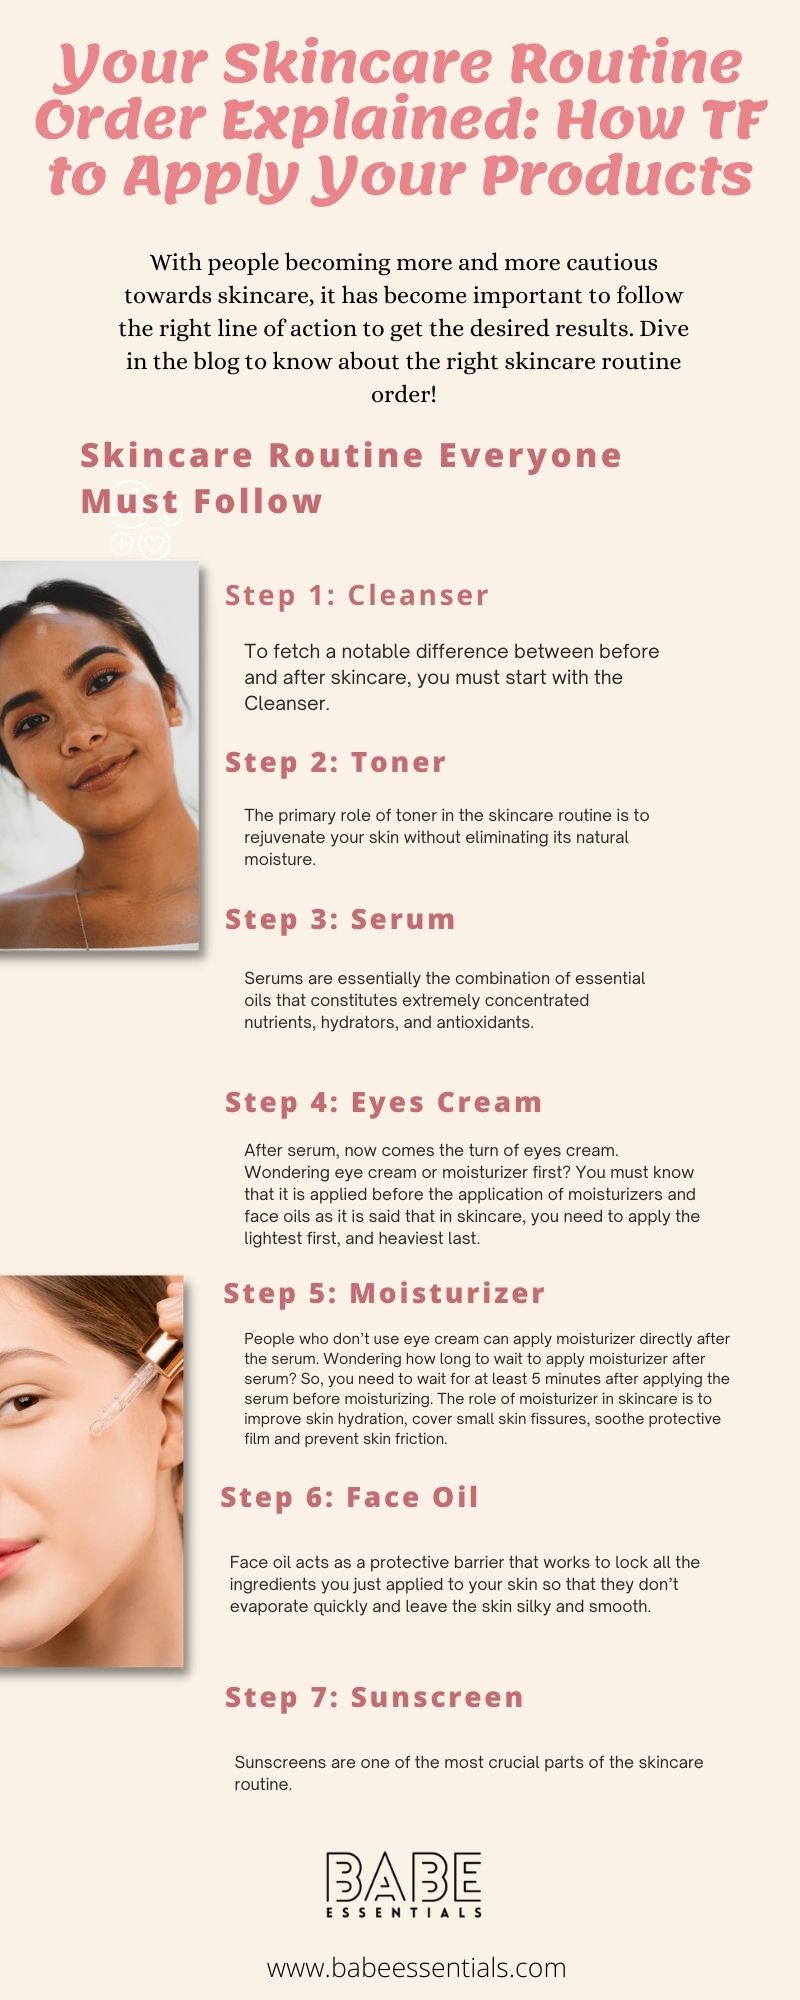 Your Skincare Routine Order Explained: How To to Apply Your Products